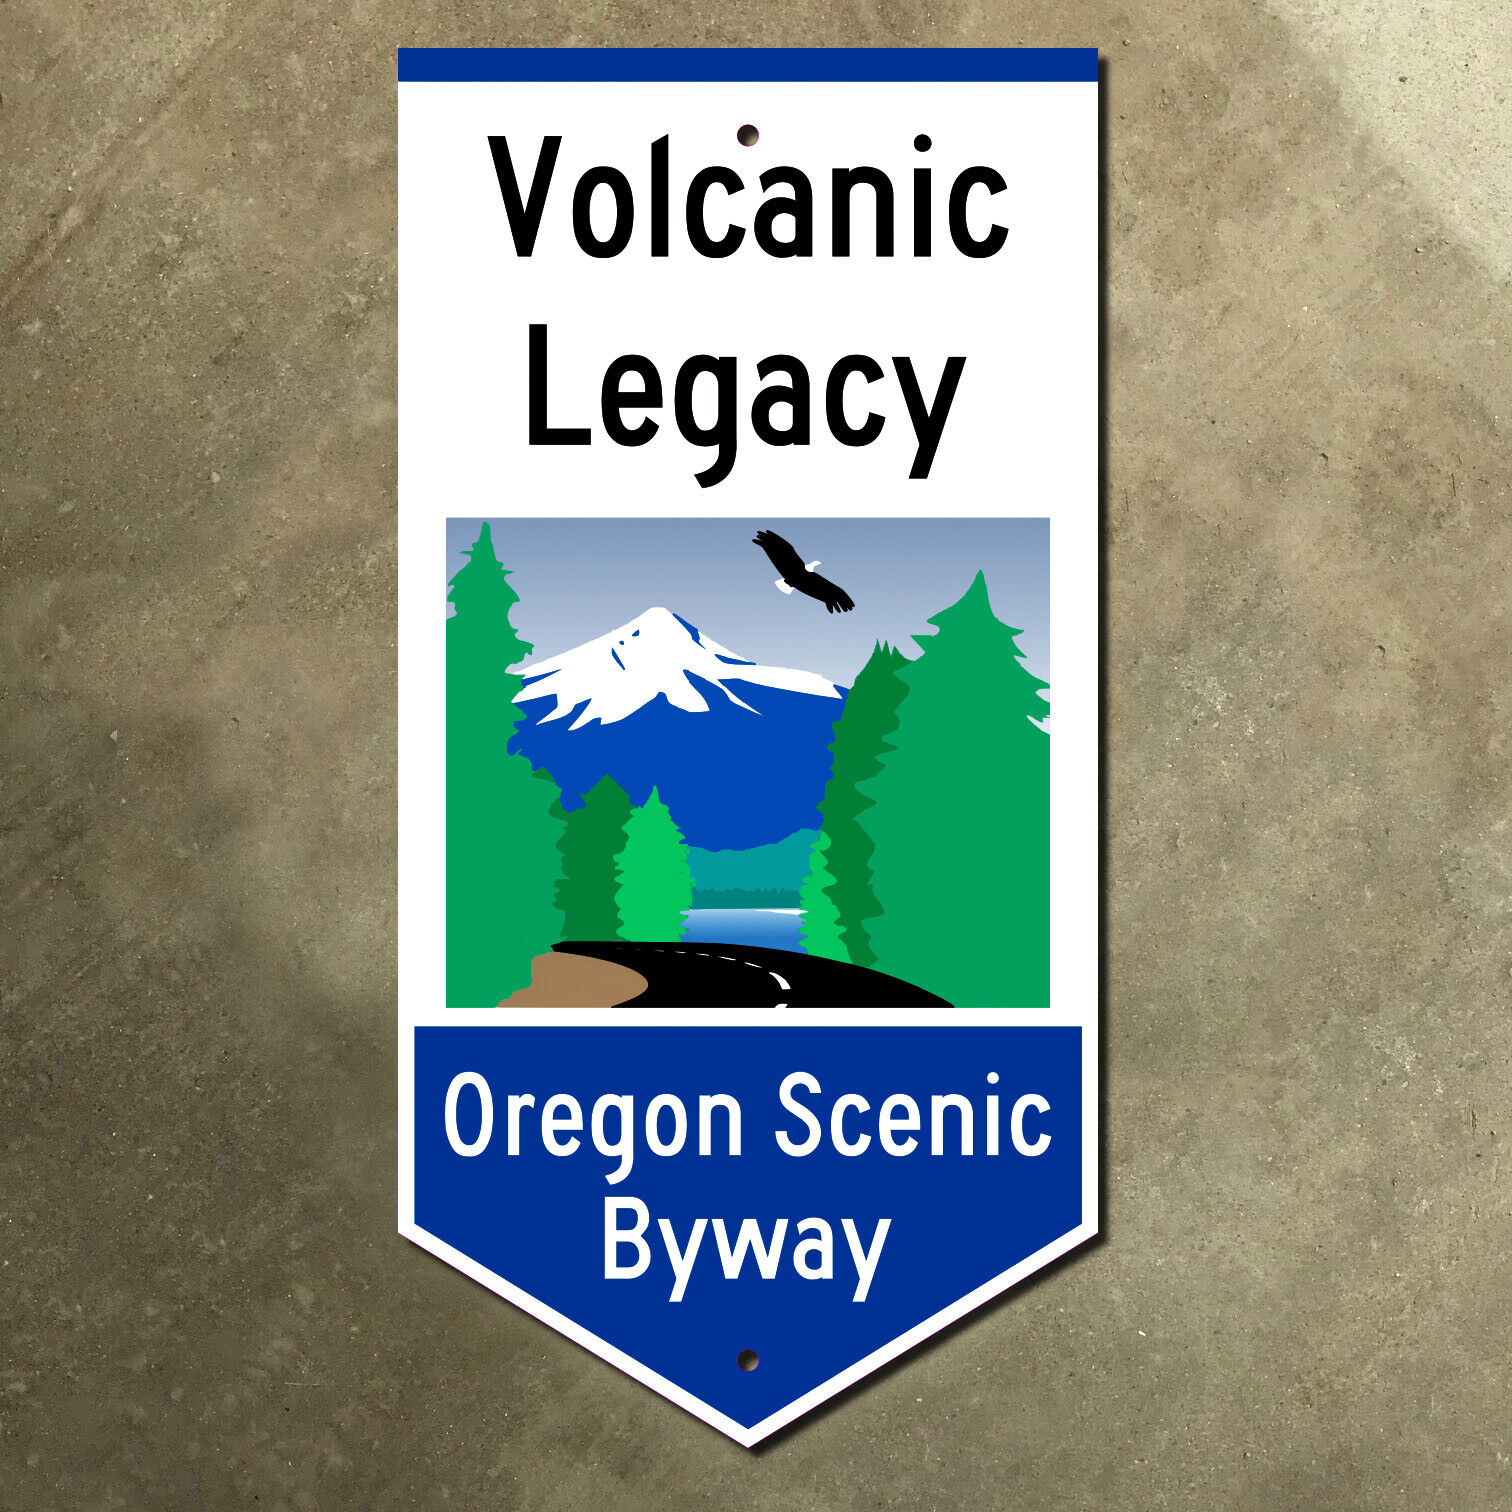 Oregon Volcanic Legacy Scenic Byway state route highway marker road sign 8x16